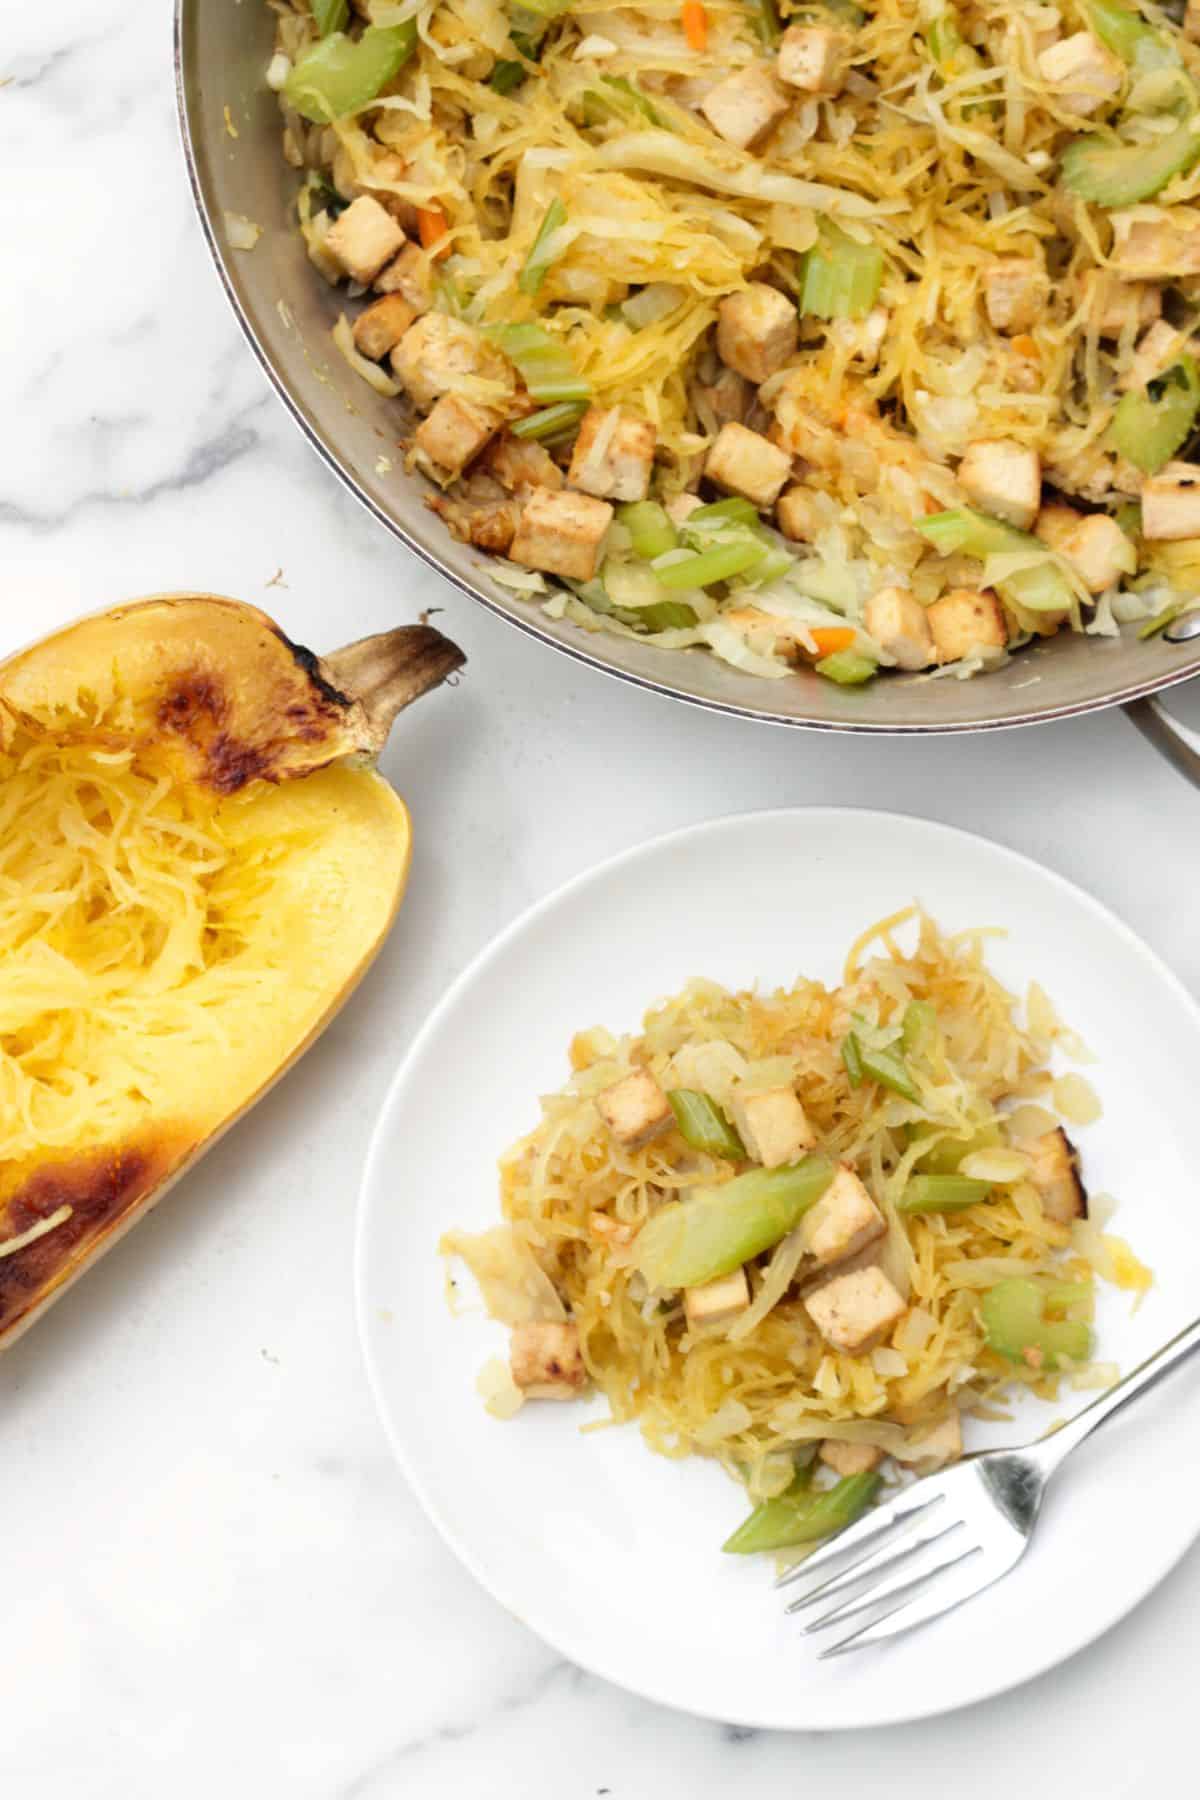 Chow mein on a plate with a spaghetti squash to the side and the pot of more chow mein.